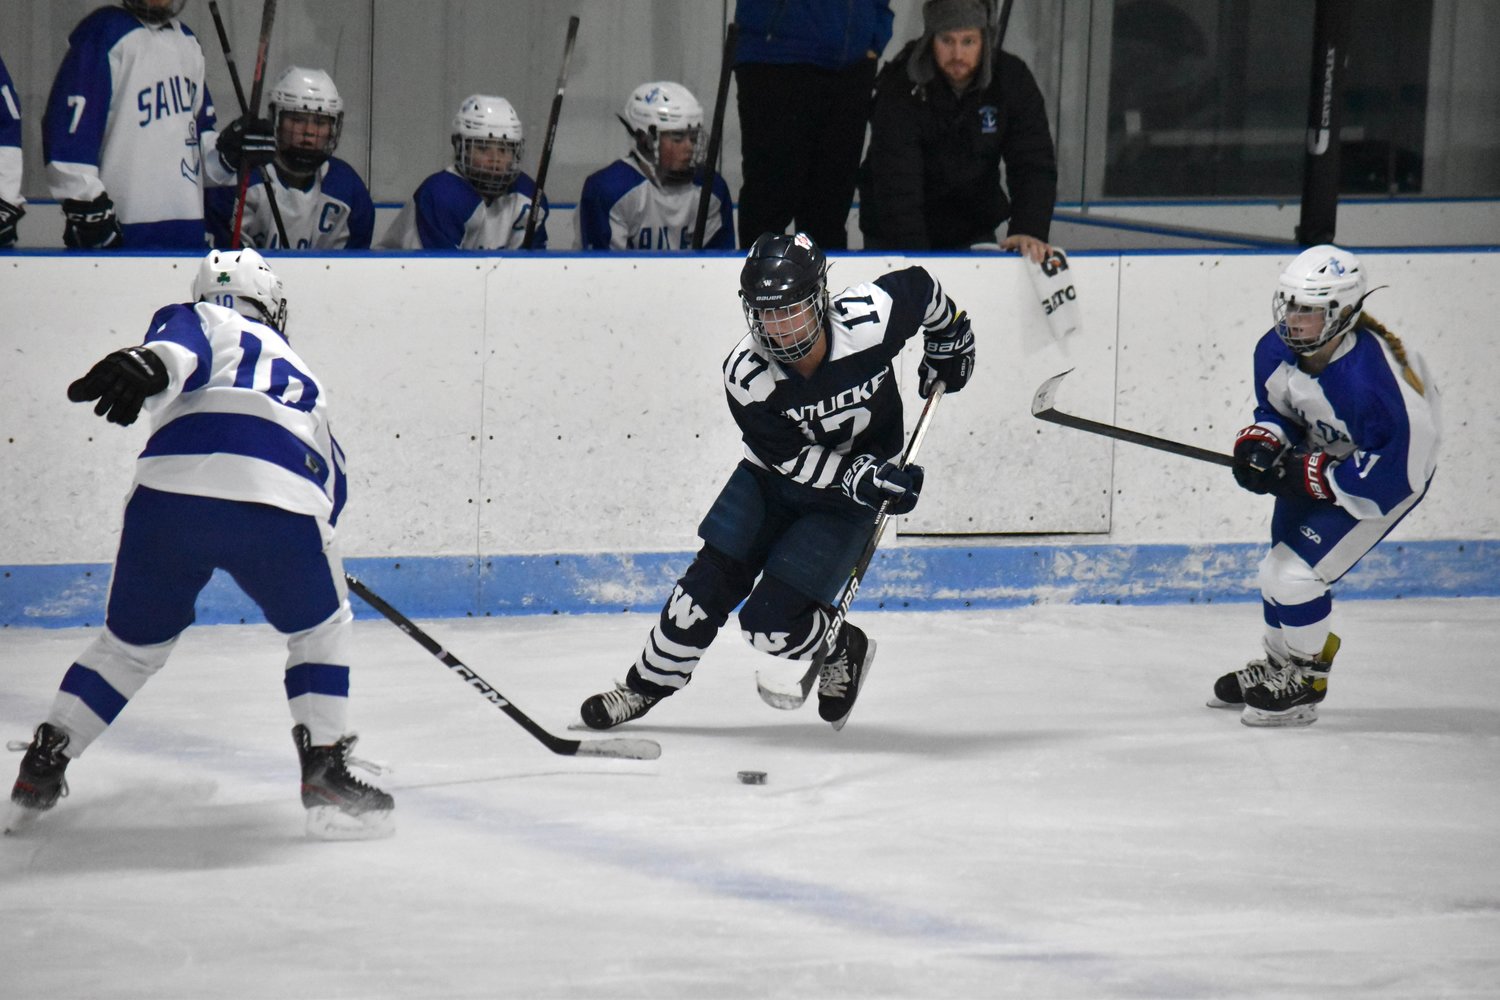 Bailey Lower stick handles between Scituate players.